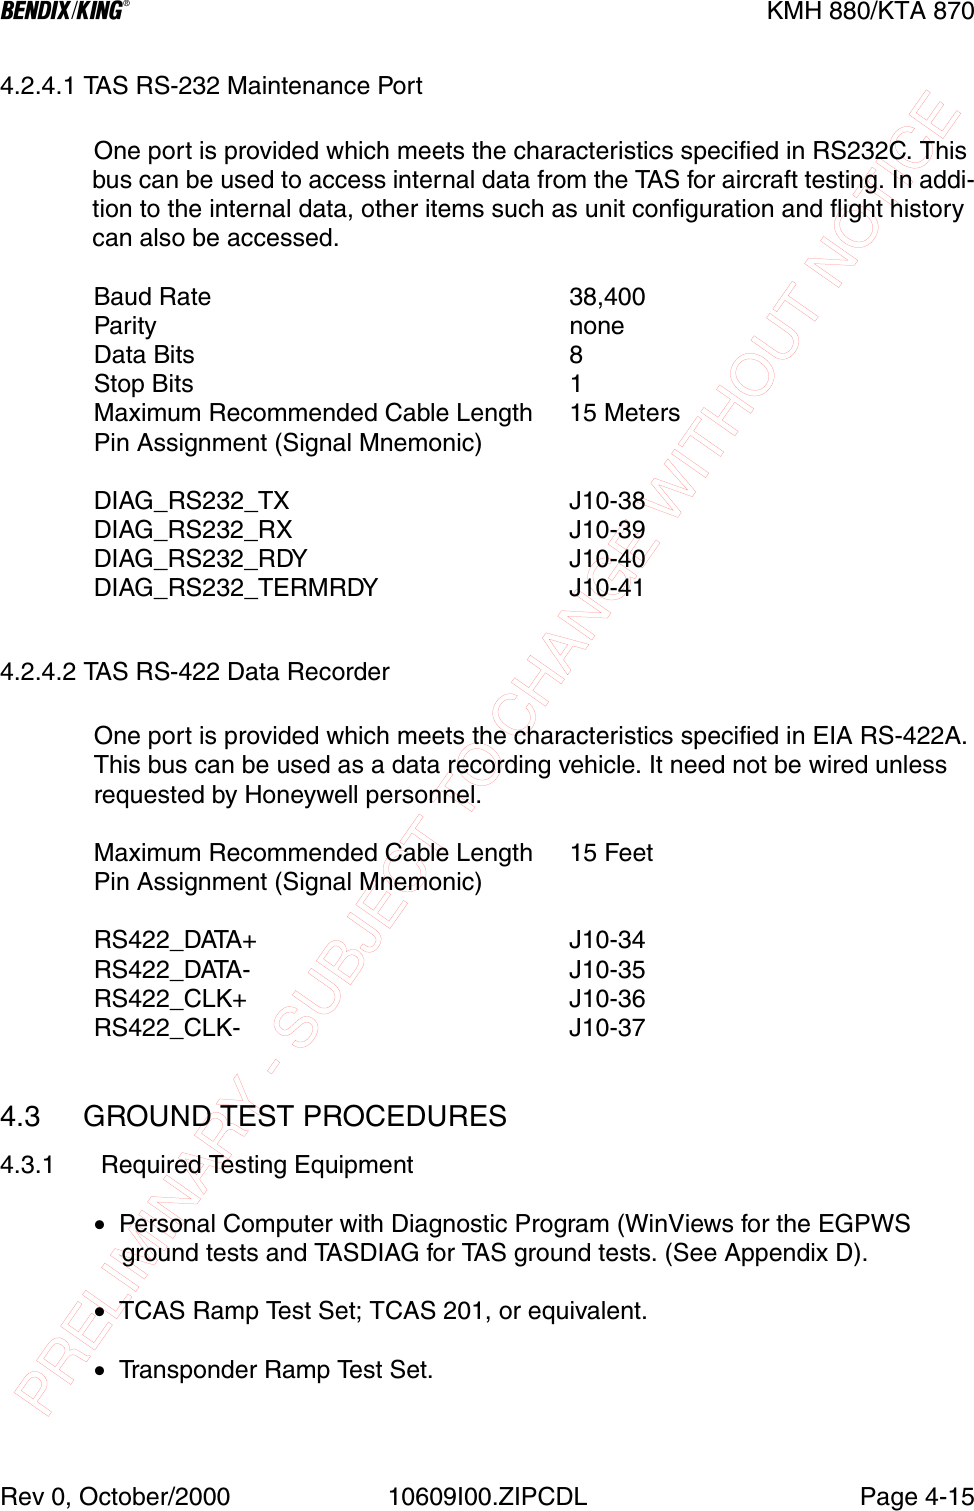 PRELIMINARY - SUBJECT TO CHANGE WITHOUT NOTICEBKMH 880/KTA 870Rev 0, October/2000 10609I00.ZIPCDL Page 4-154.2.4.1 TAS RS-232 Maintenance PortOne port is provided which meets the characteristics specified in RS232C. This bus can be used to access internal data from the TAS for aircraft testing. In addi-tion to the internal data, other items such as unit configuration and flight history can also be accessed.Baud Rate  38,400Parity  noneData Bits  8Stop Bits  1Maximum Recommended Cable Length  15 MetersPin Assignment (Signal Mnemonic)DIAG_RS232_TX  J10-38DIAG_RS232_RX  J10-39DIAG_RS232_RDY  J10-40DIAG_RS232_TERMRDY  J10-414.2.4.2 TAS RS-422 Data RecorderOne port is provided which meets the characteristics specified in EIA RS-422A. This bus can be used as a data recording vehicle. It need not be wired unless requested by Honeywell personnel.Maximum Recommended Cable Length  15 FeetPin Assignment (Signal Mnemonic)RS422_DATA+  J10-34RS422_DATA-  J10-35RS422_CLK+  J10-36RS422_CLK-  J10-374.3  GROUND TEST PROCEDURES4.3.1  Required Testing Equipment•  Personal Computer with Diagnostic Program (WinViews for the EGPWS    ground tests and TASDIAG for TAS ground tests. (See Appendix D).•  TCAS Ramp Test Set; TCAS 201, or equivalent.•  Transponder Ramp Test Set.